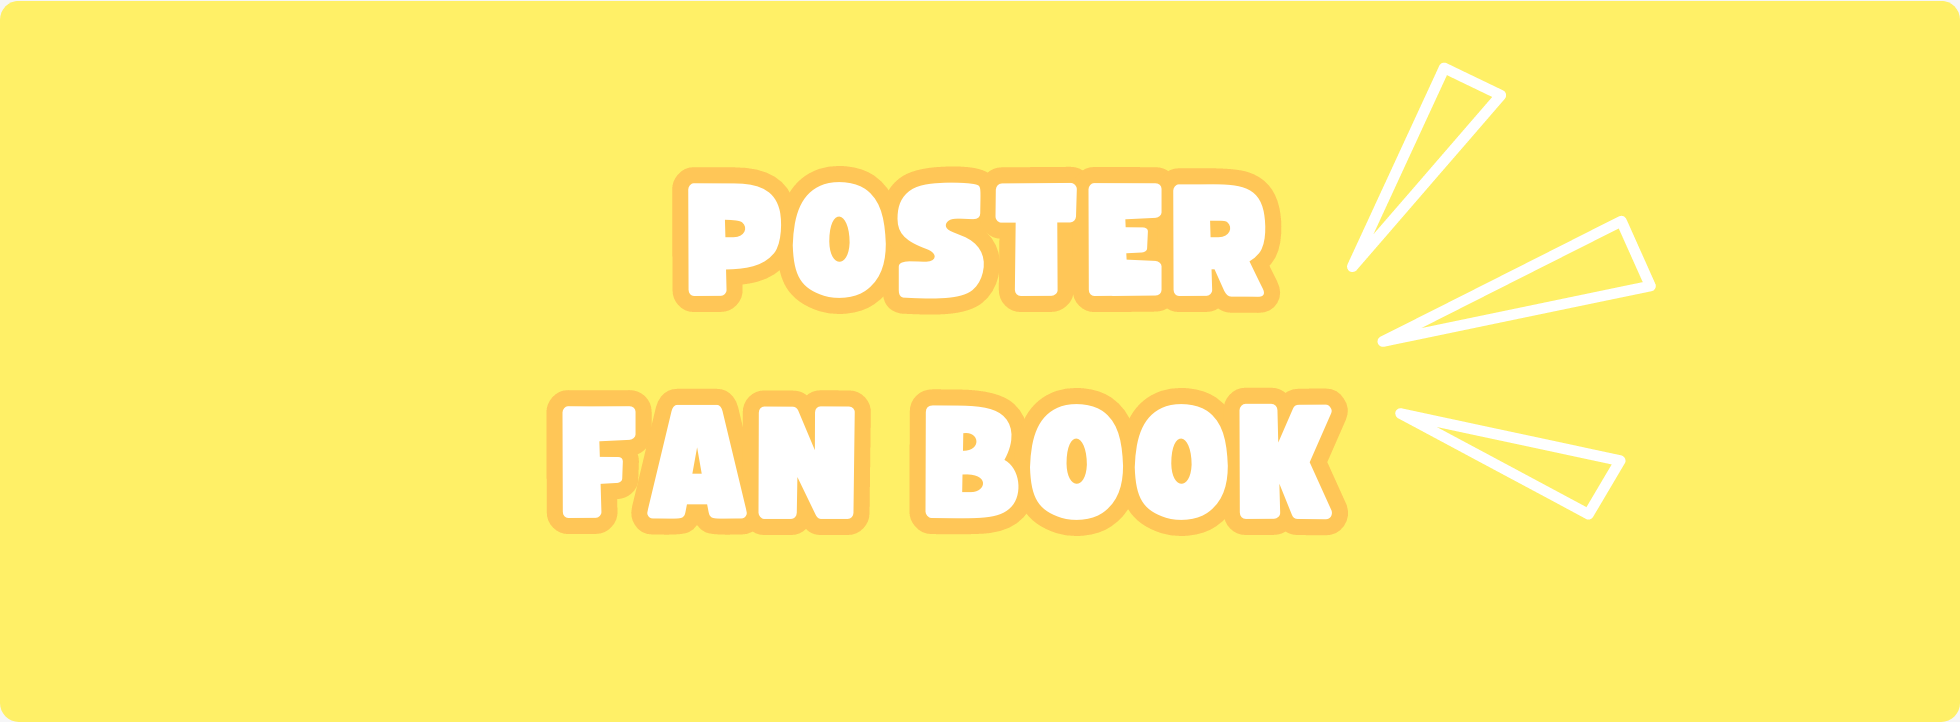 Poster Fanbook